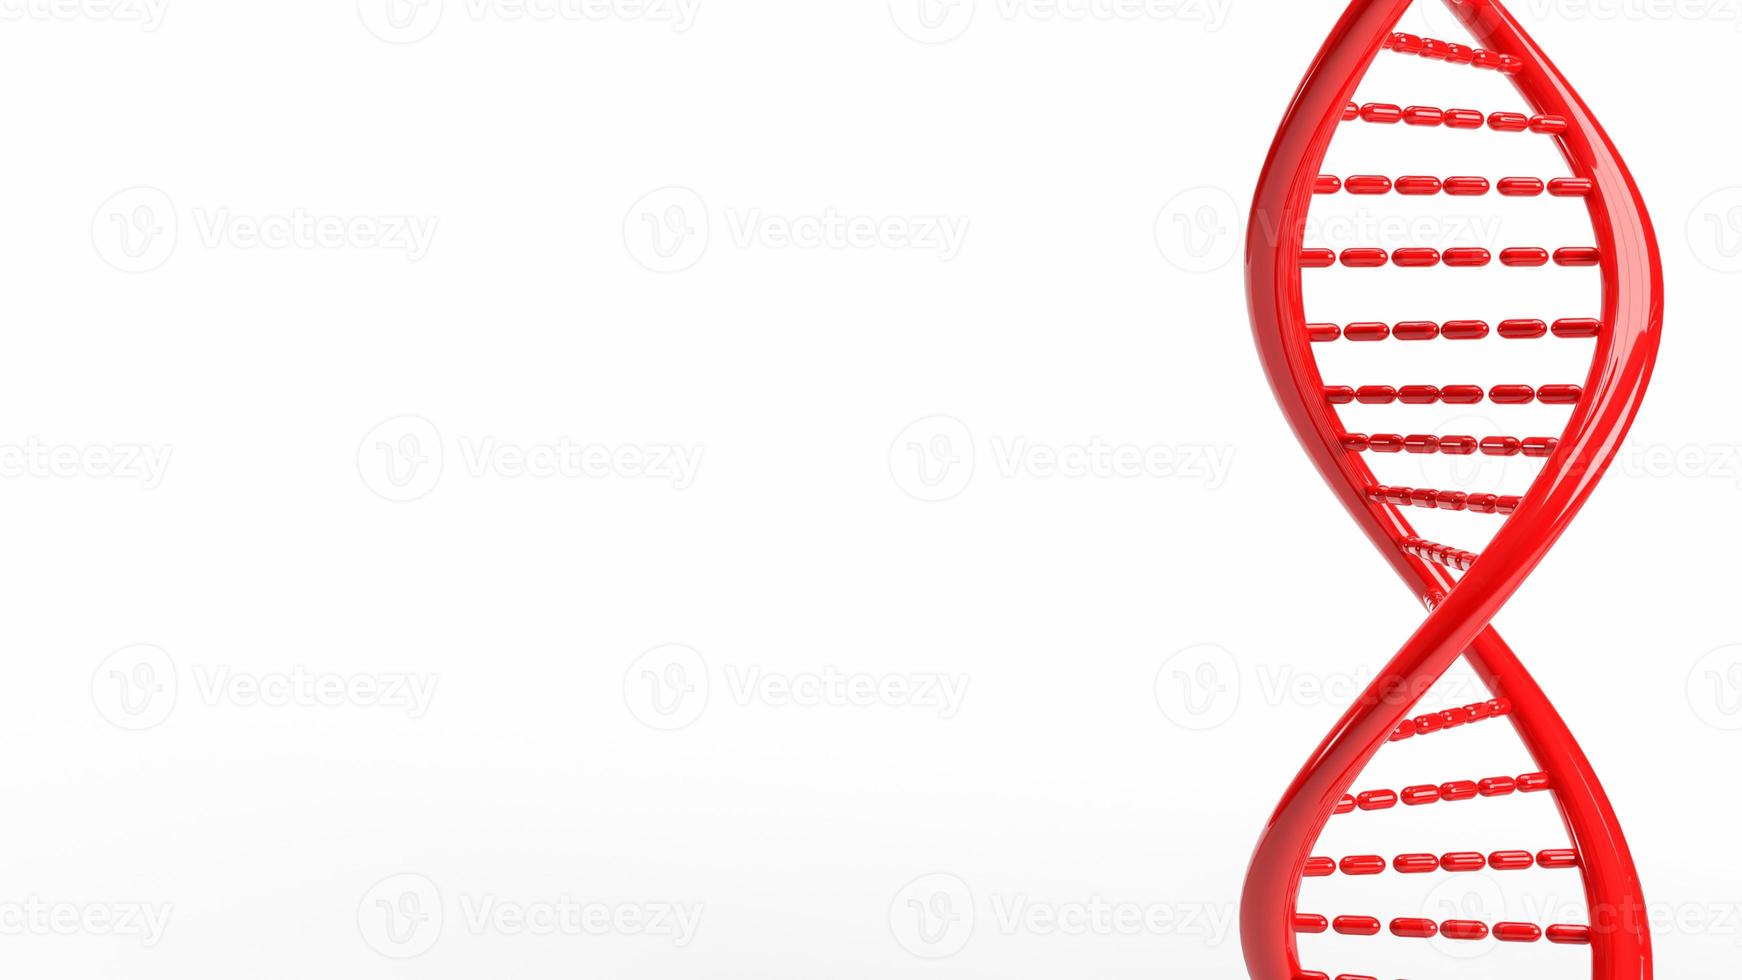 The red dna on white background for sci or medical concept 3d rendering photo